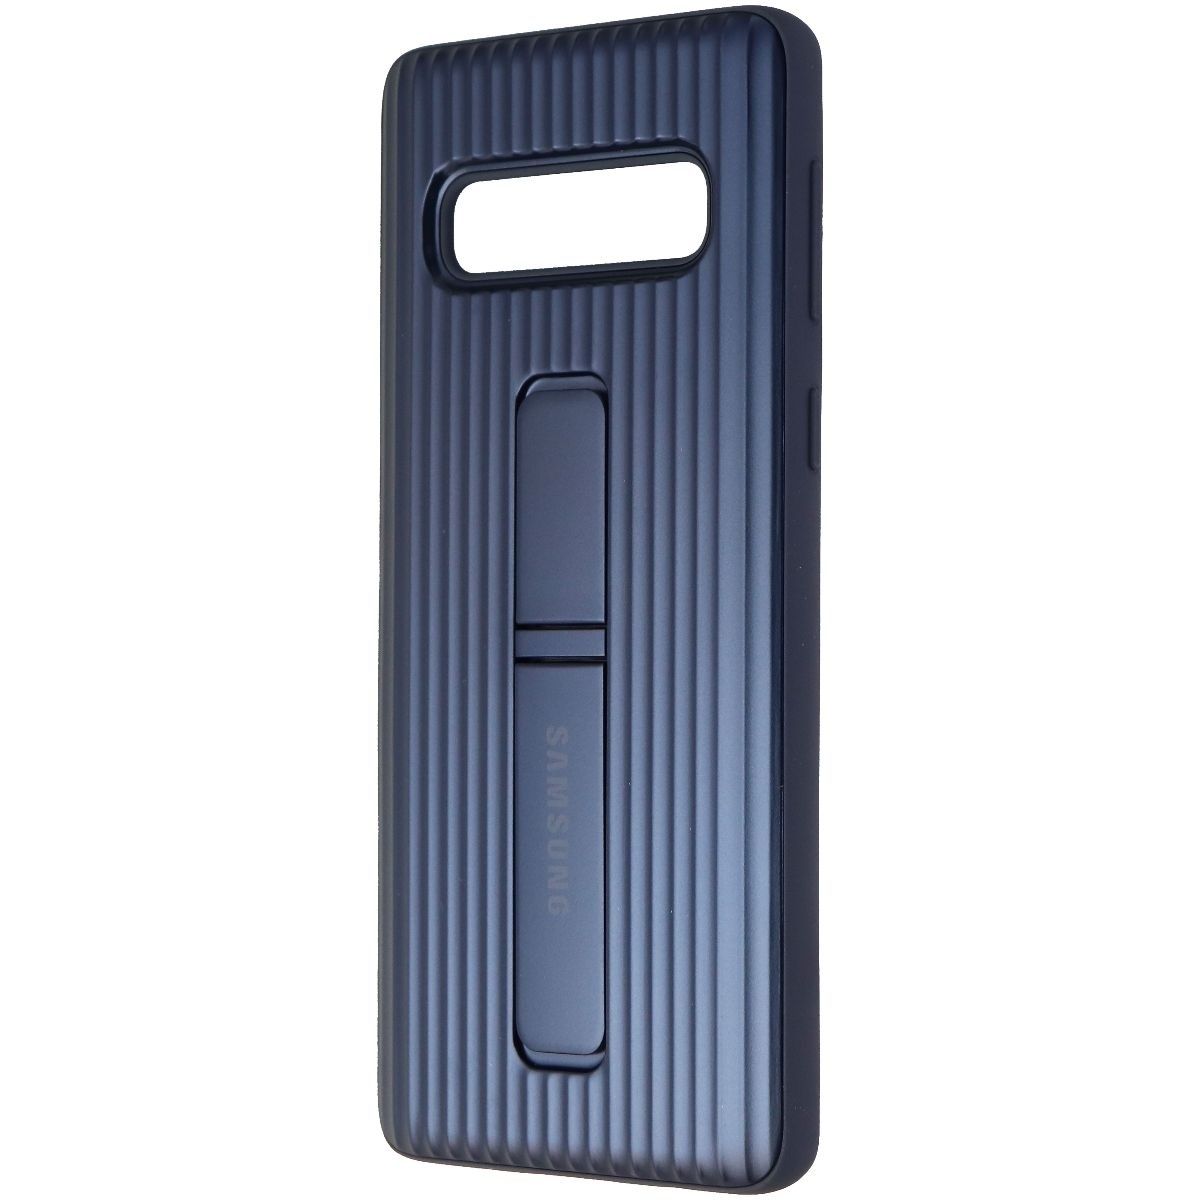 Samsung Protective Standing Cover For Samsung Galaxy S10 - Navy Blue